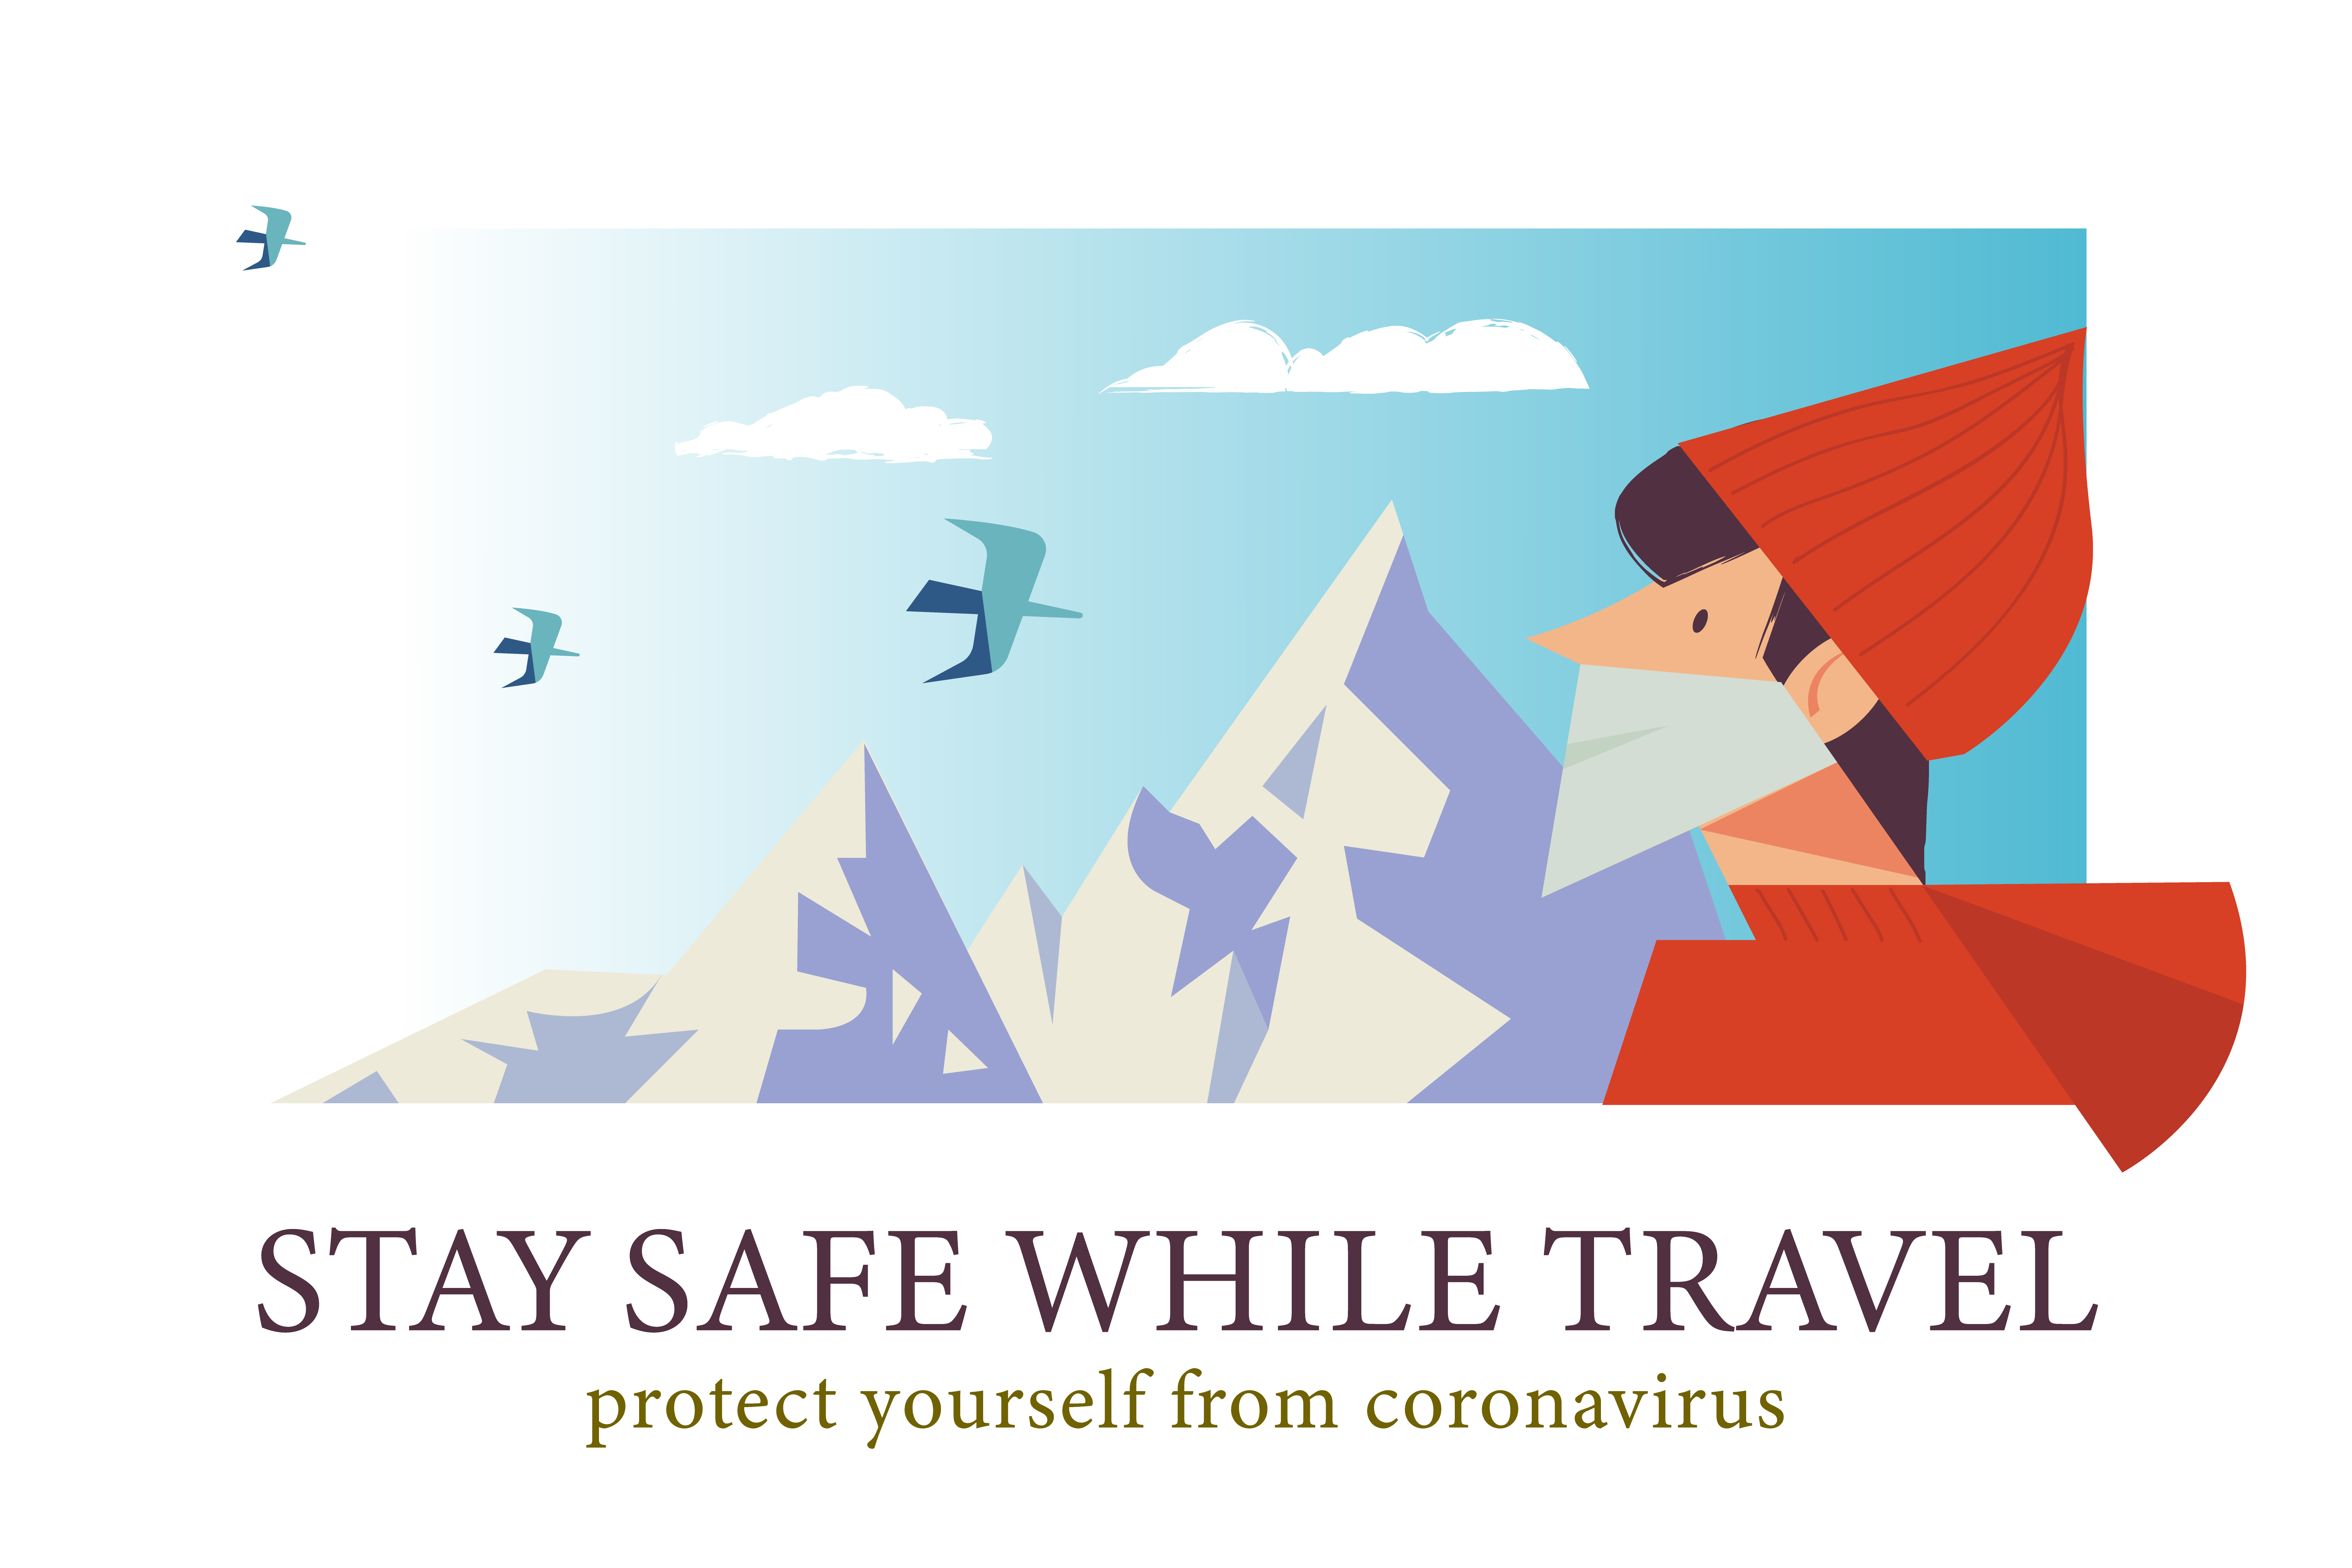 Stay safe while traveling. Vector poster encouraging people to wear masks. The guy is traveling in the mountains in a medical mask. Stay safe while traveling. Vector poster encouraging people to wear masks.